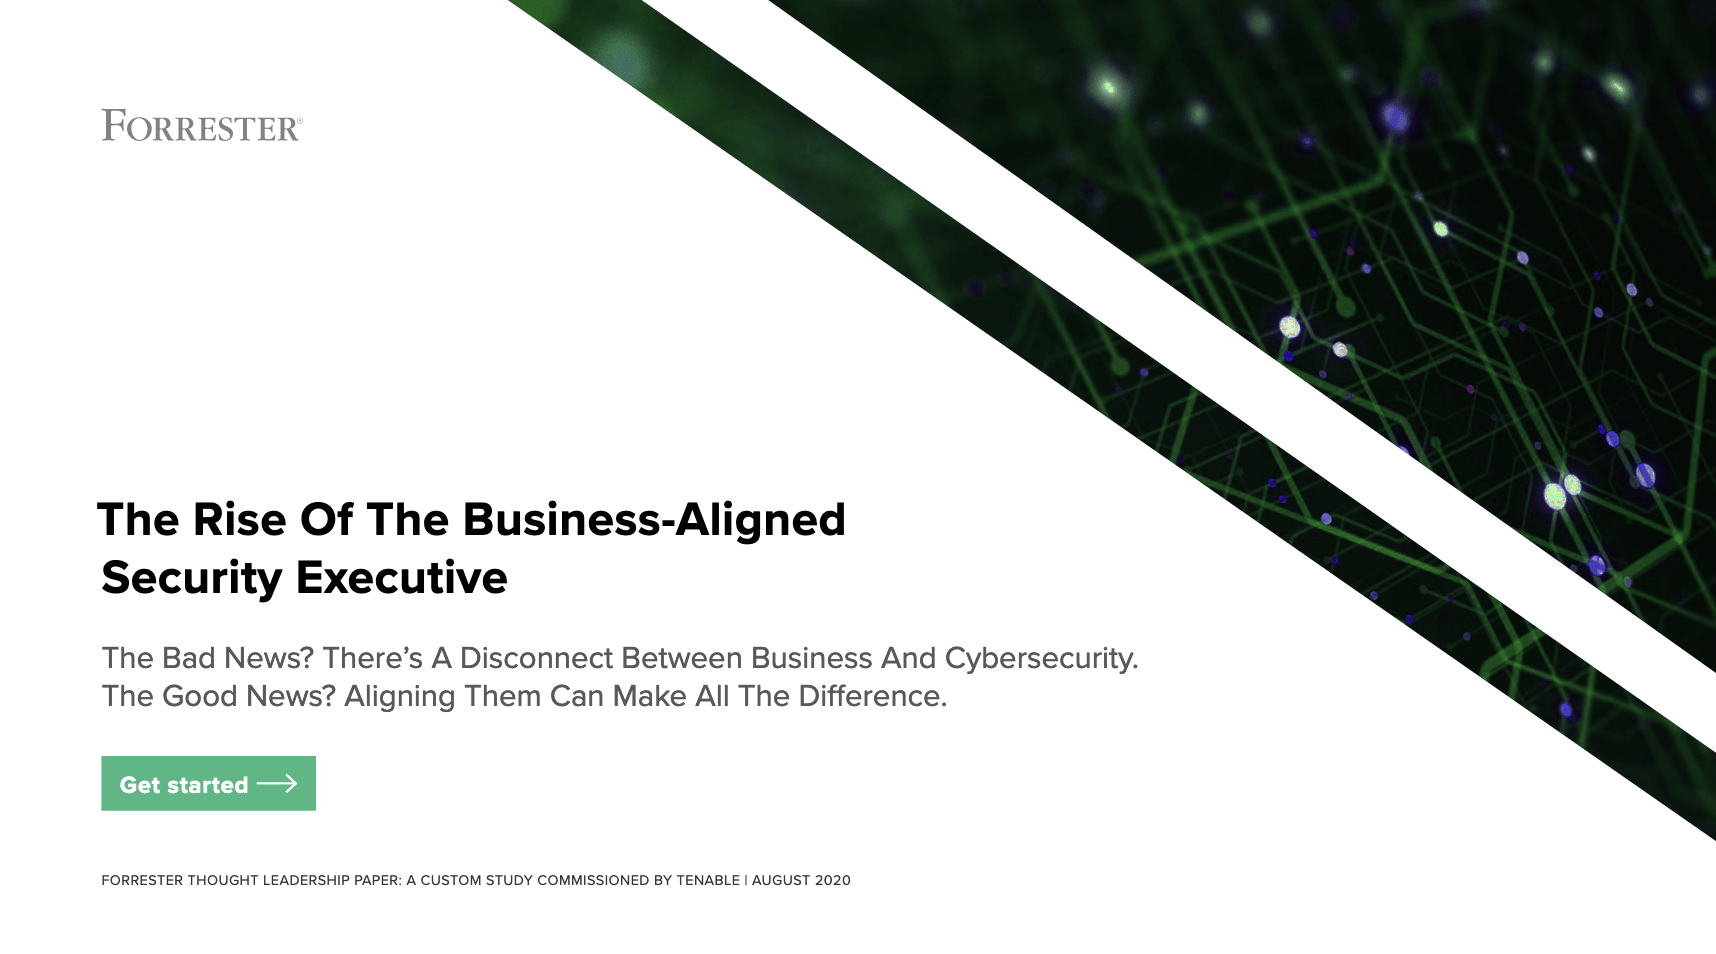 forrester tlp - New Study: The Rise of the Business-Aligned Security Executive